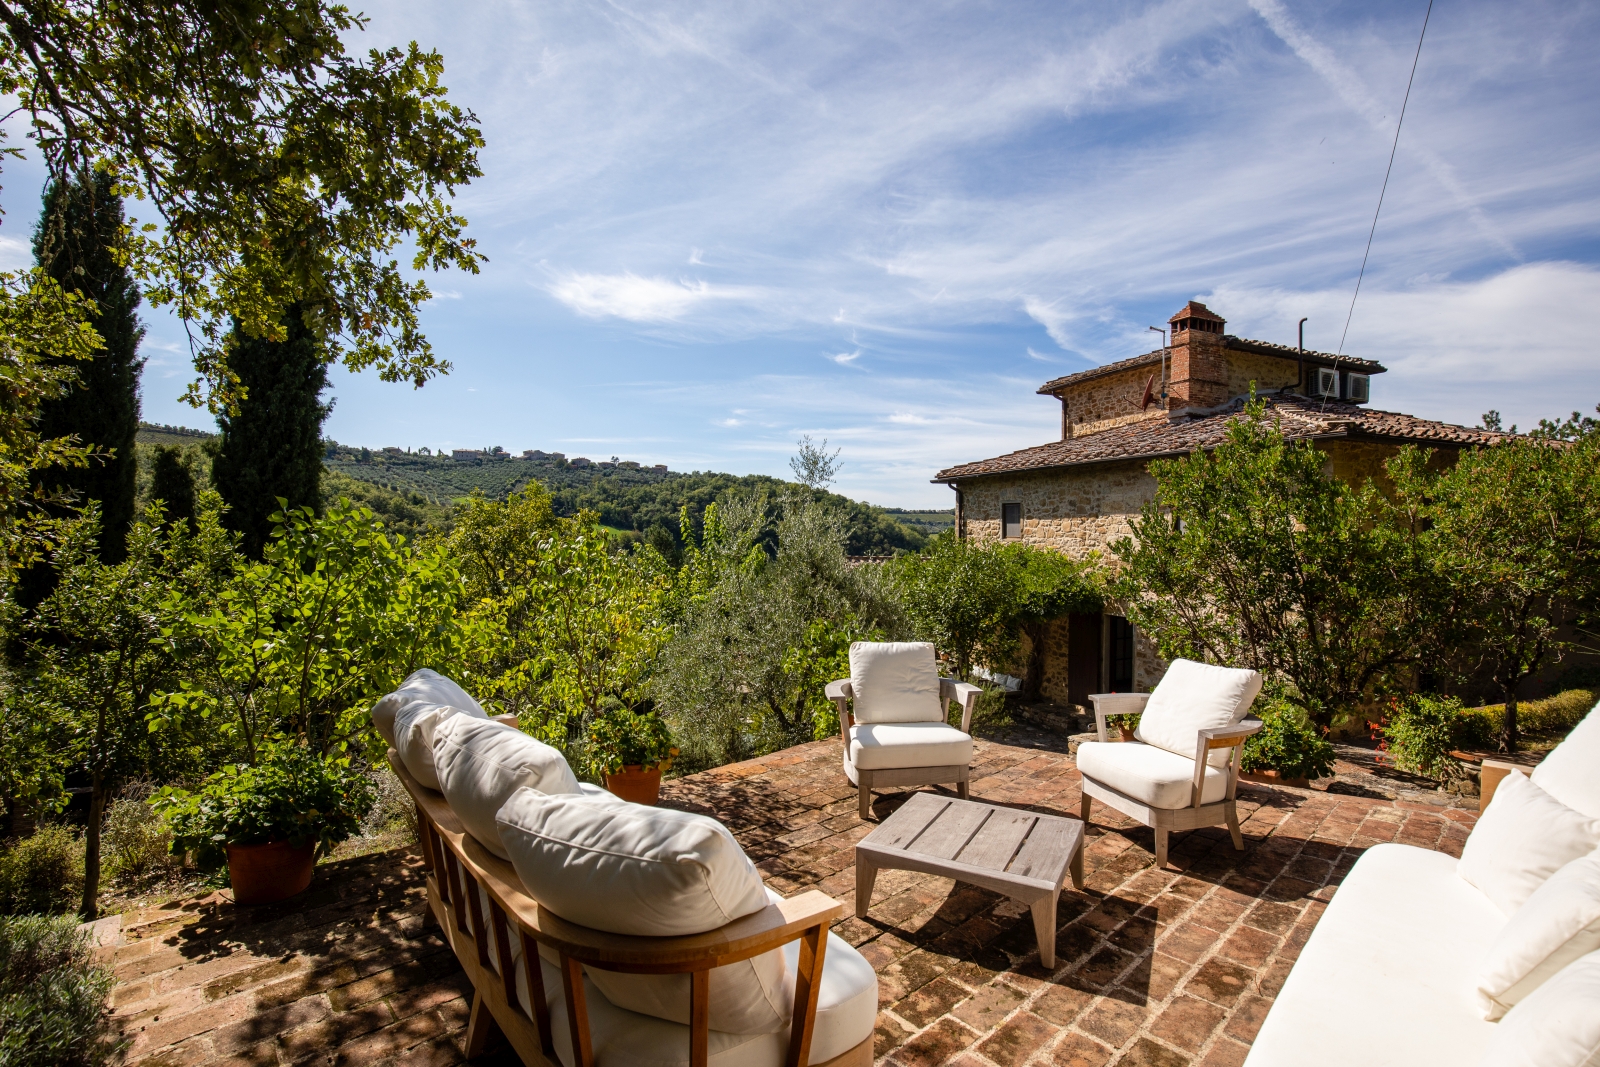 Patio with comfy chairs, coffee table and countryside view at the back of Villa Baciata in Tuscany, Italy